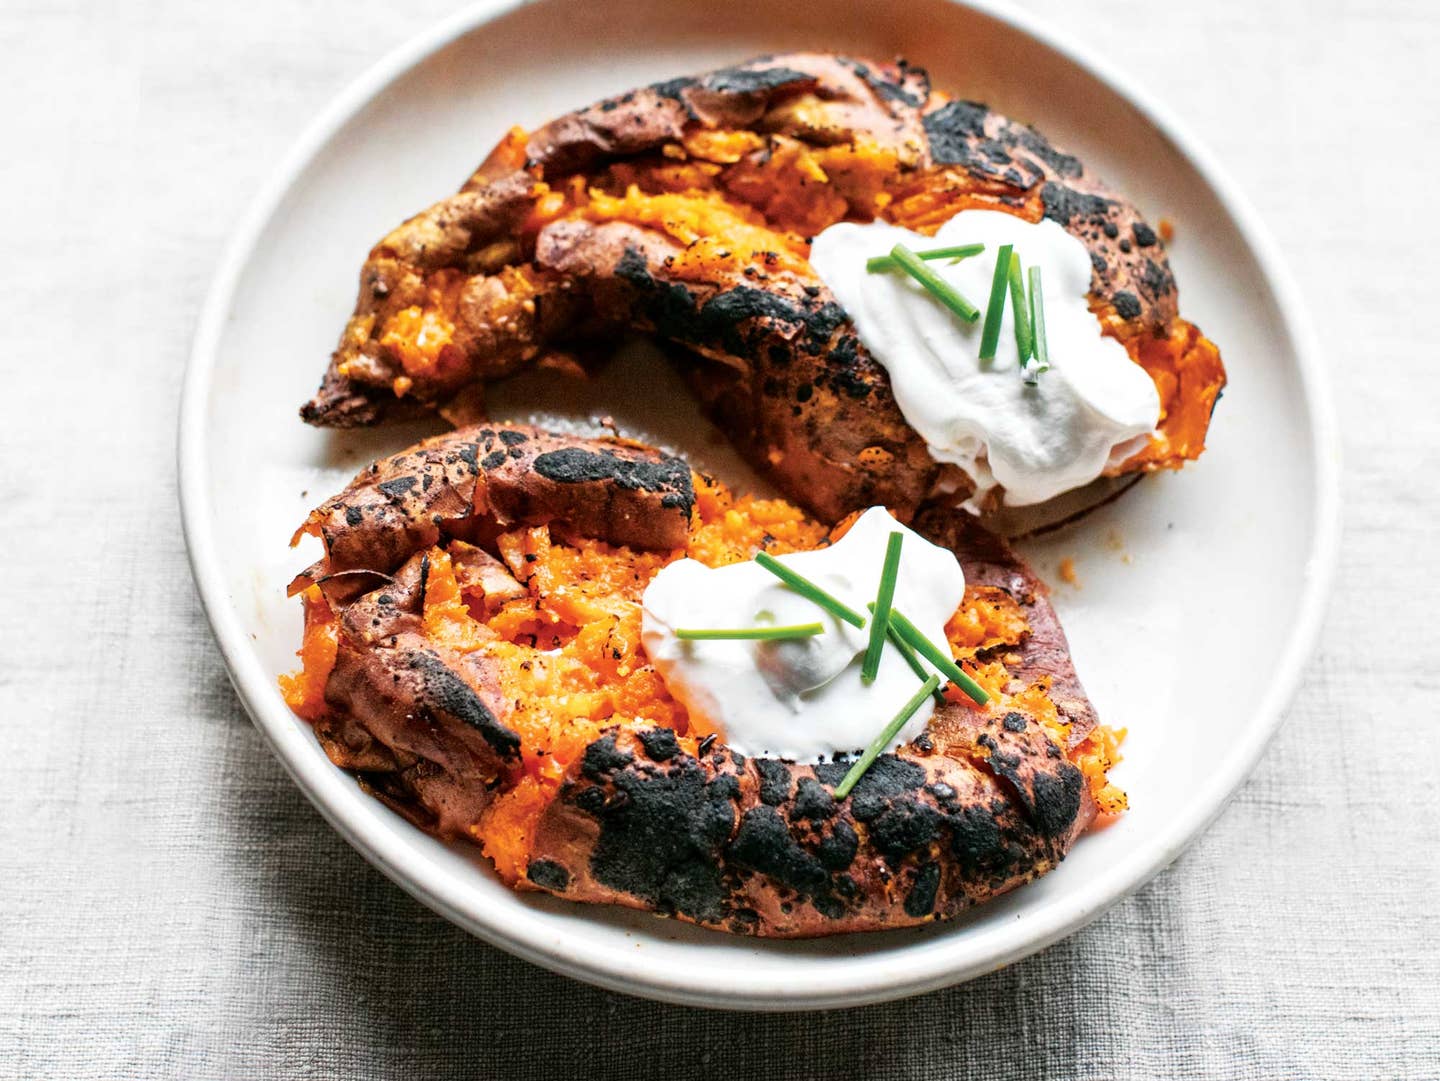 How We’re Making All Our Baked Potatoes From Now On